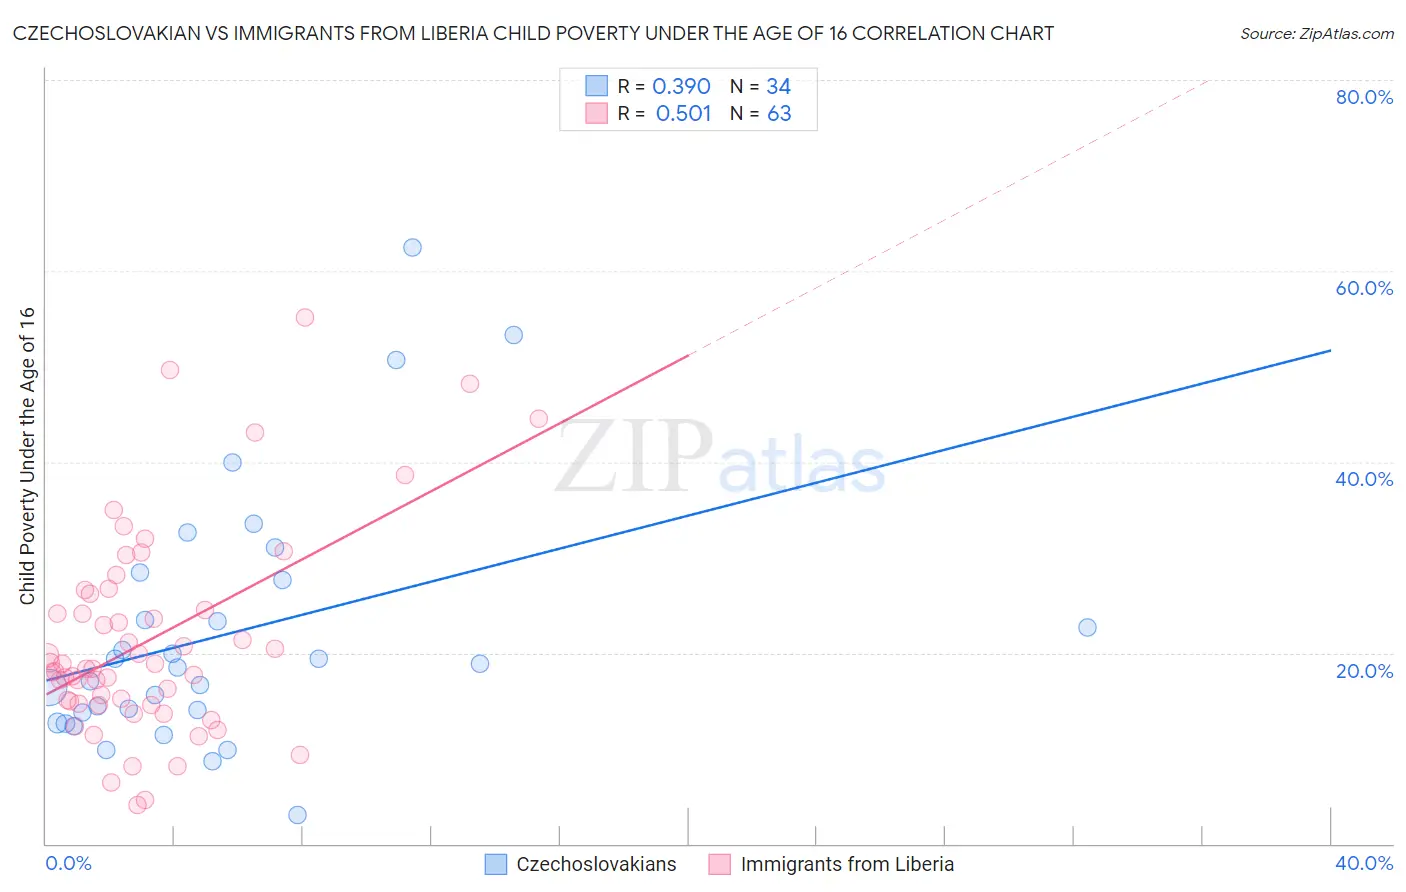 Czechoslovakian vs Immigrants from Liberia Child Poverty Under the Age of 16